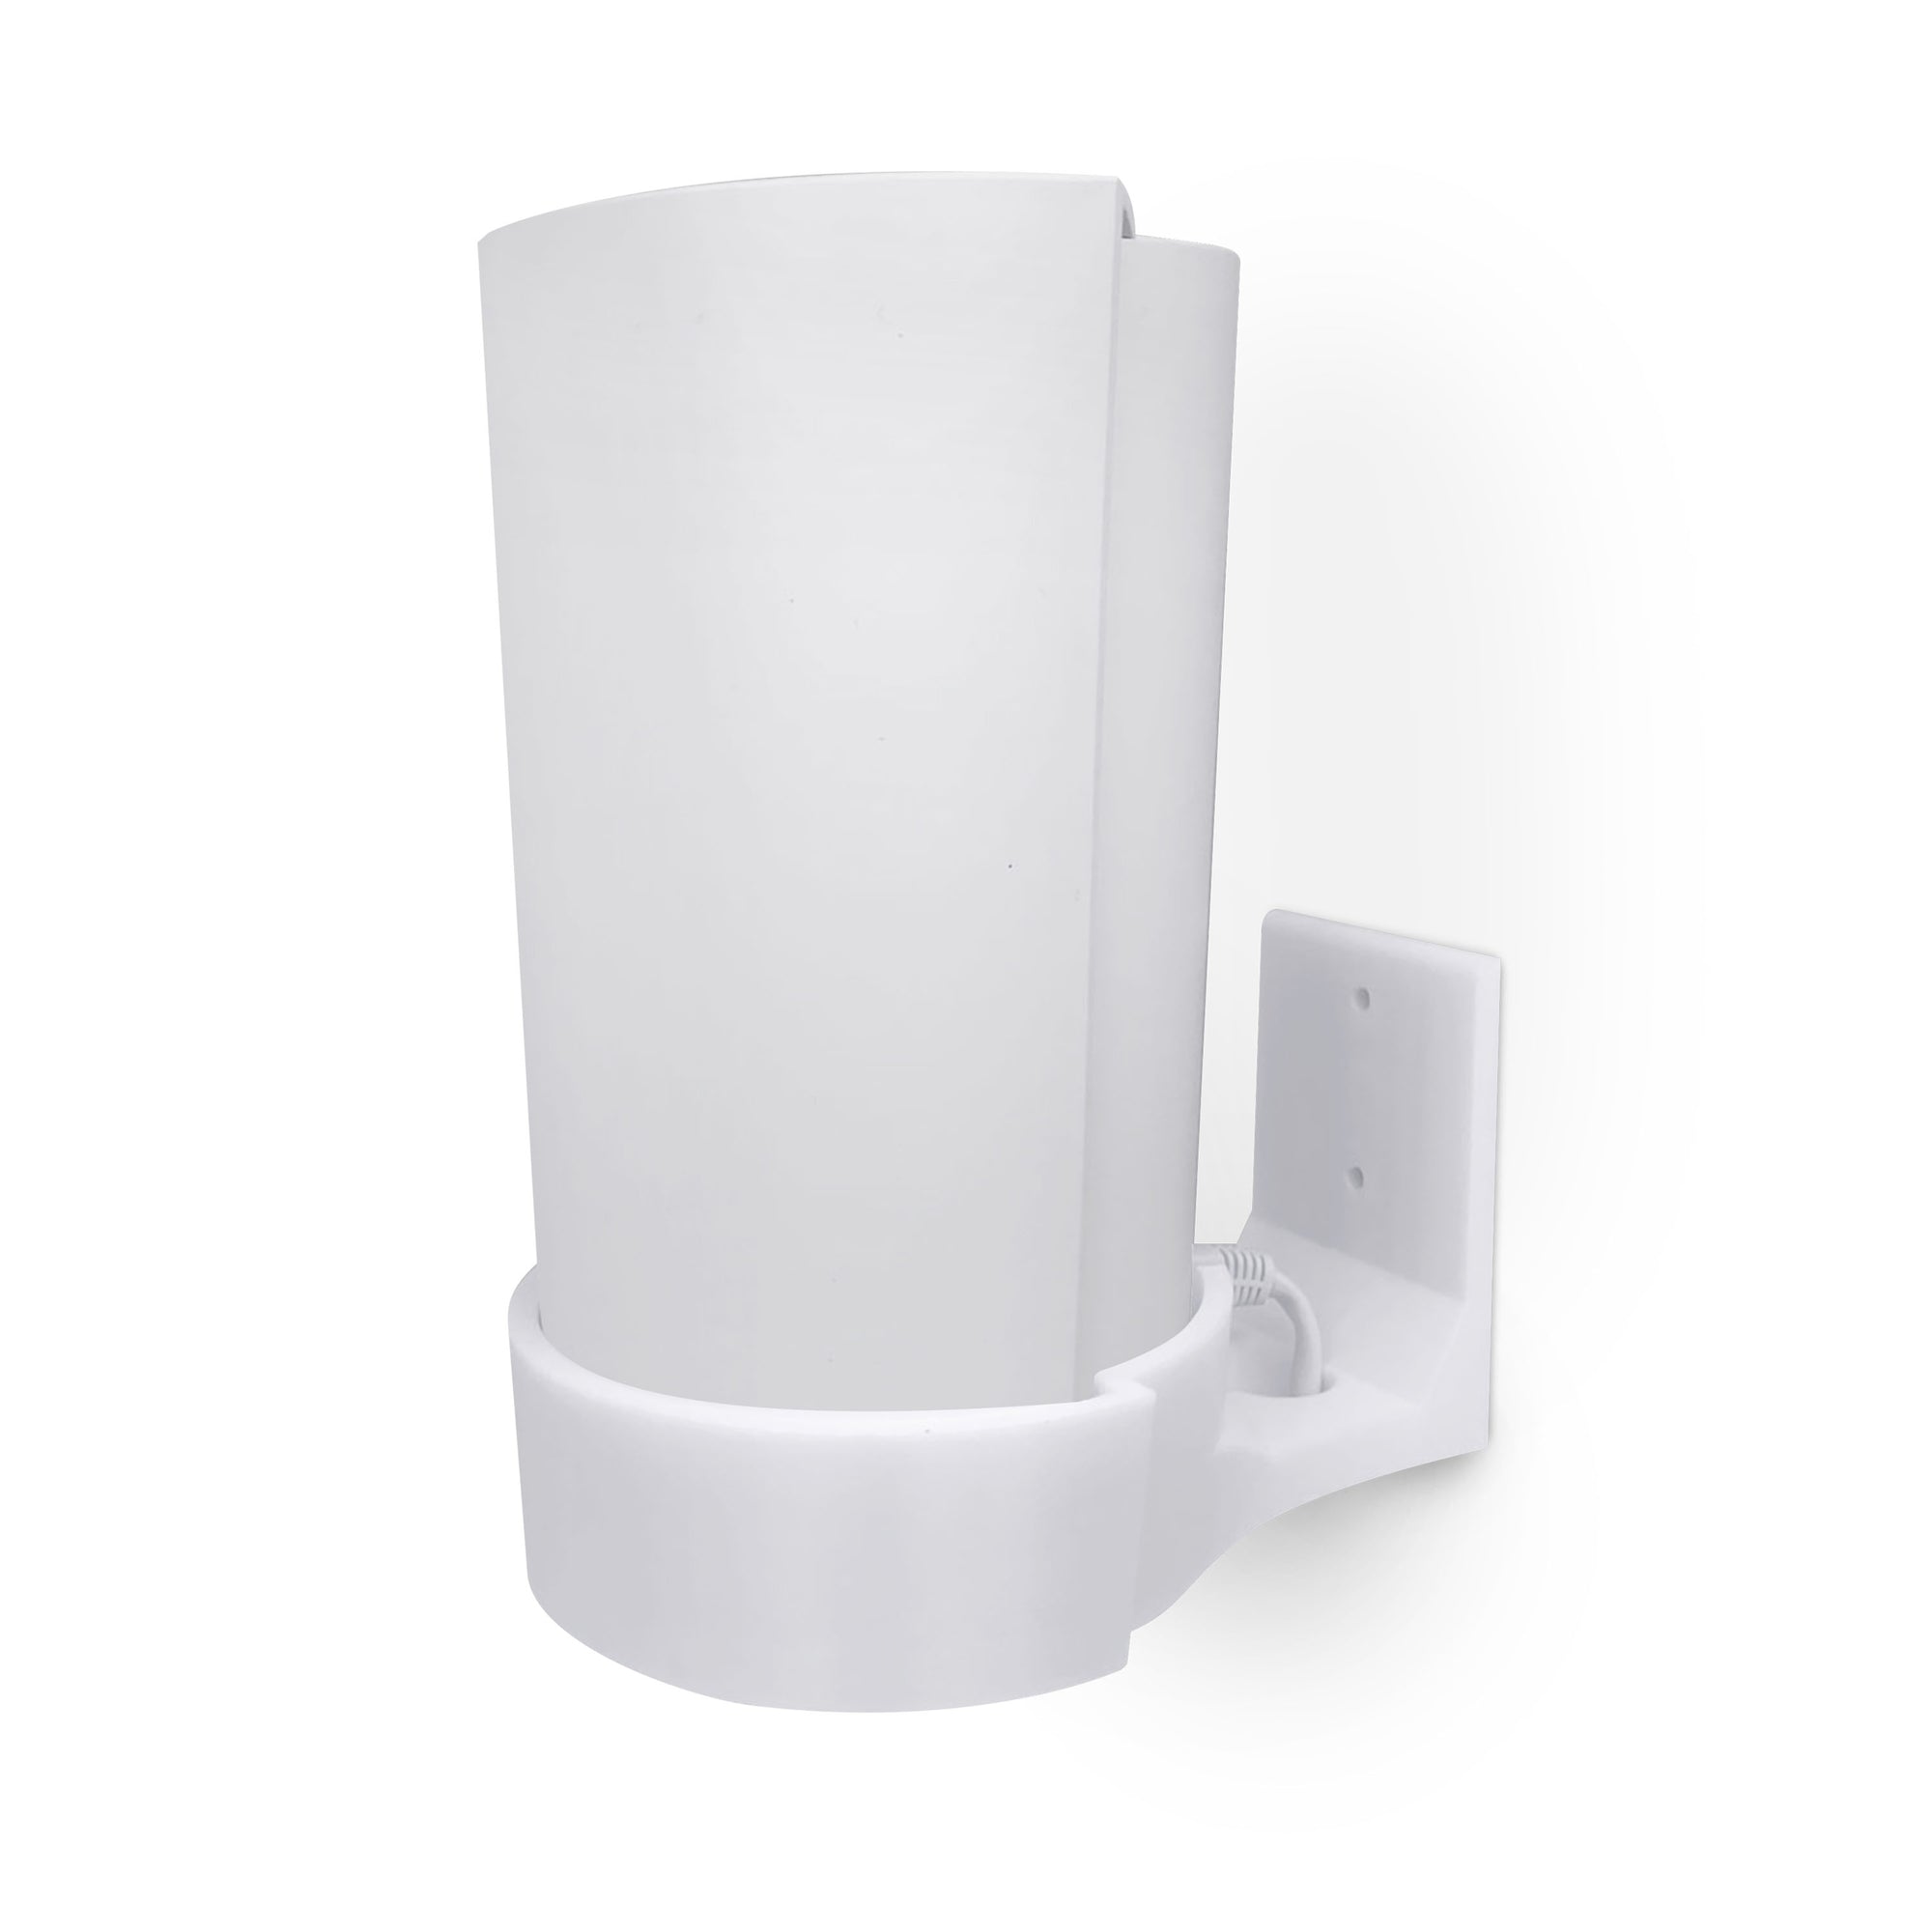 Adhesive Wall Mount for TP Link Deco X90, X95 & XE200 WiFi Mesh Router, Easy To Install Holder, Strong Adhesive & Screw In, Increase Range